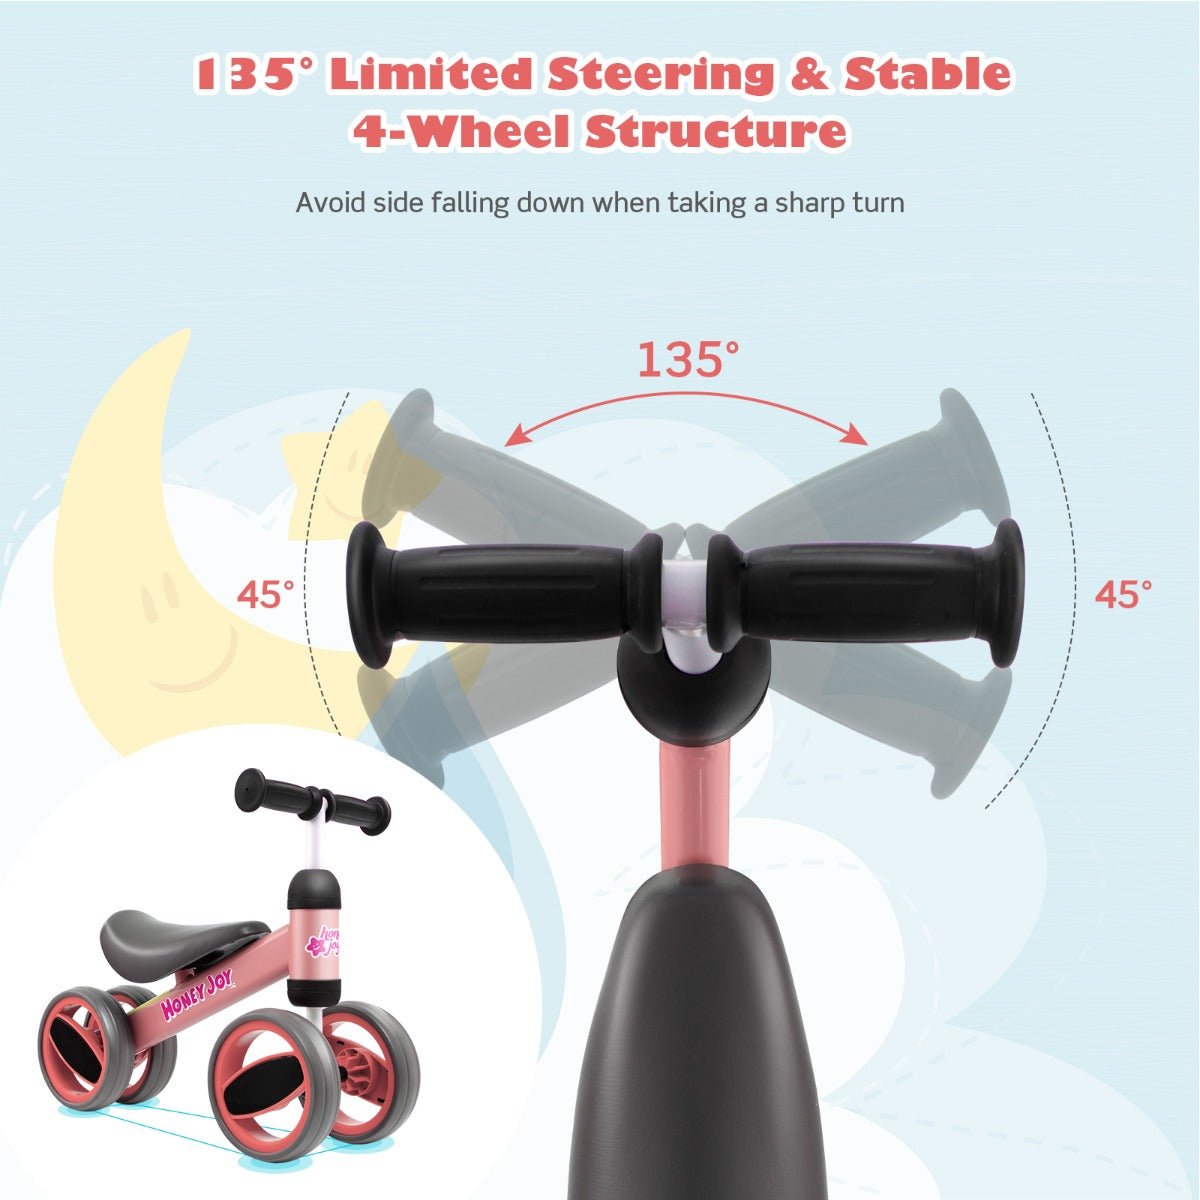 Upgrade to a Pink Baby Balance Bike - Shop Now!